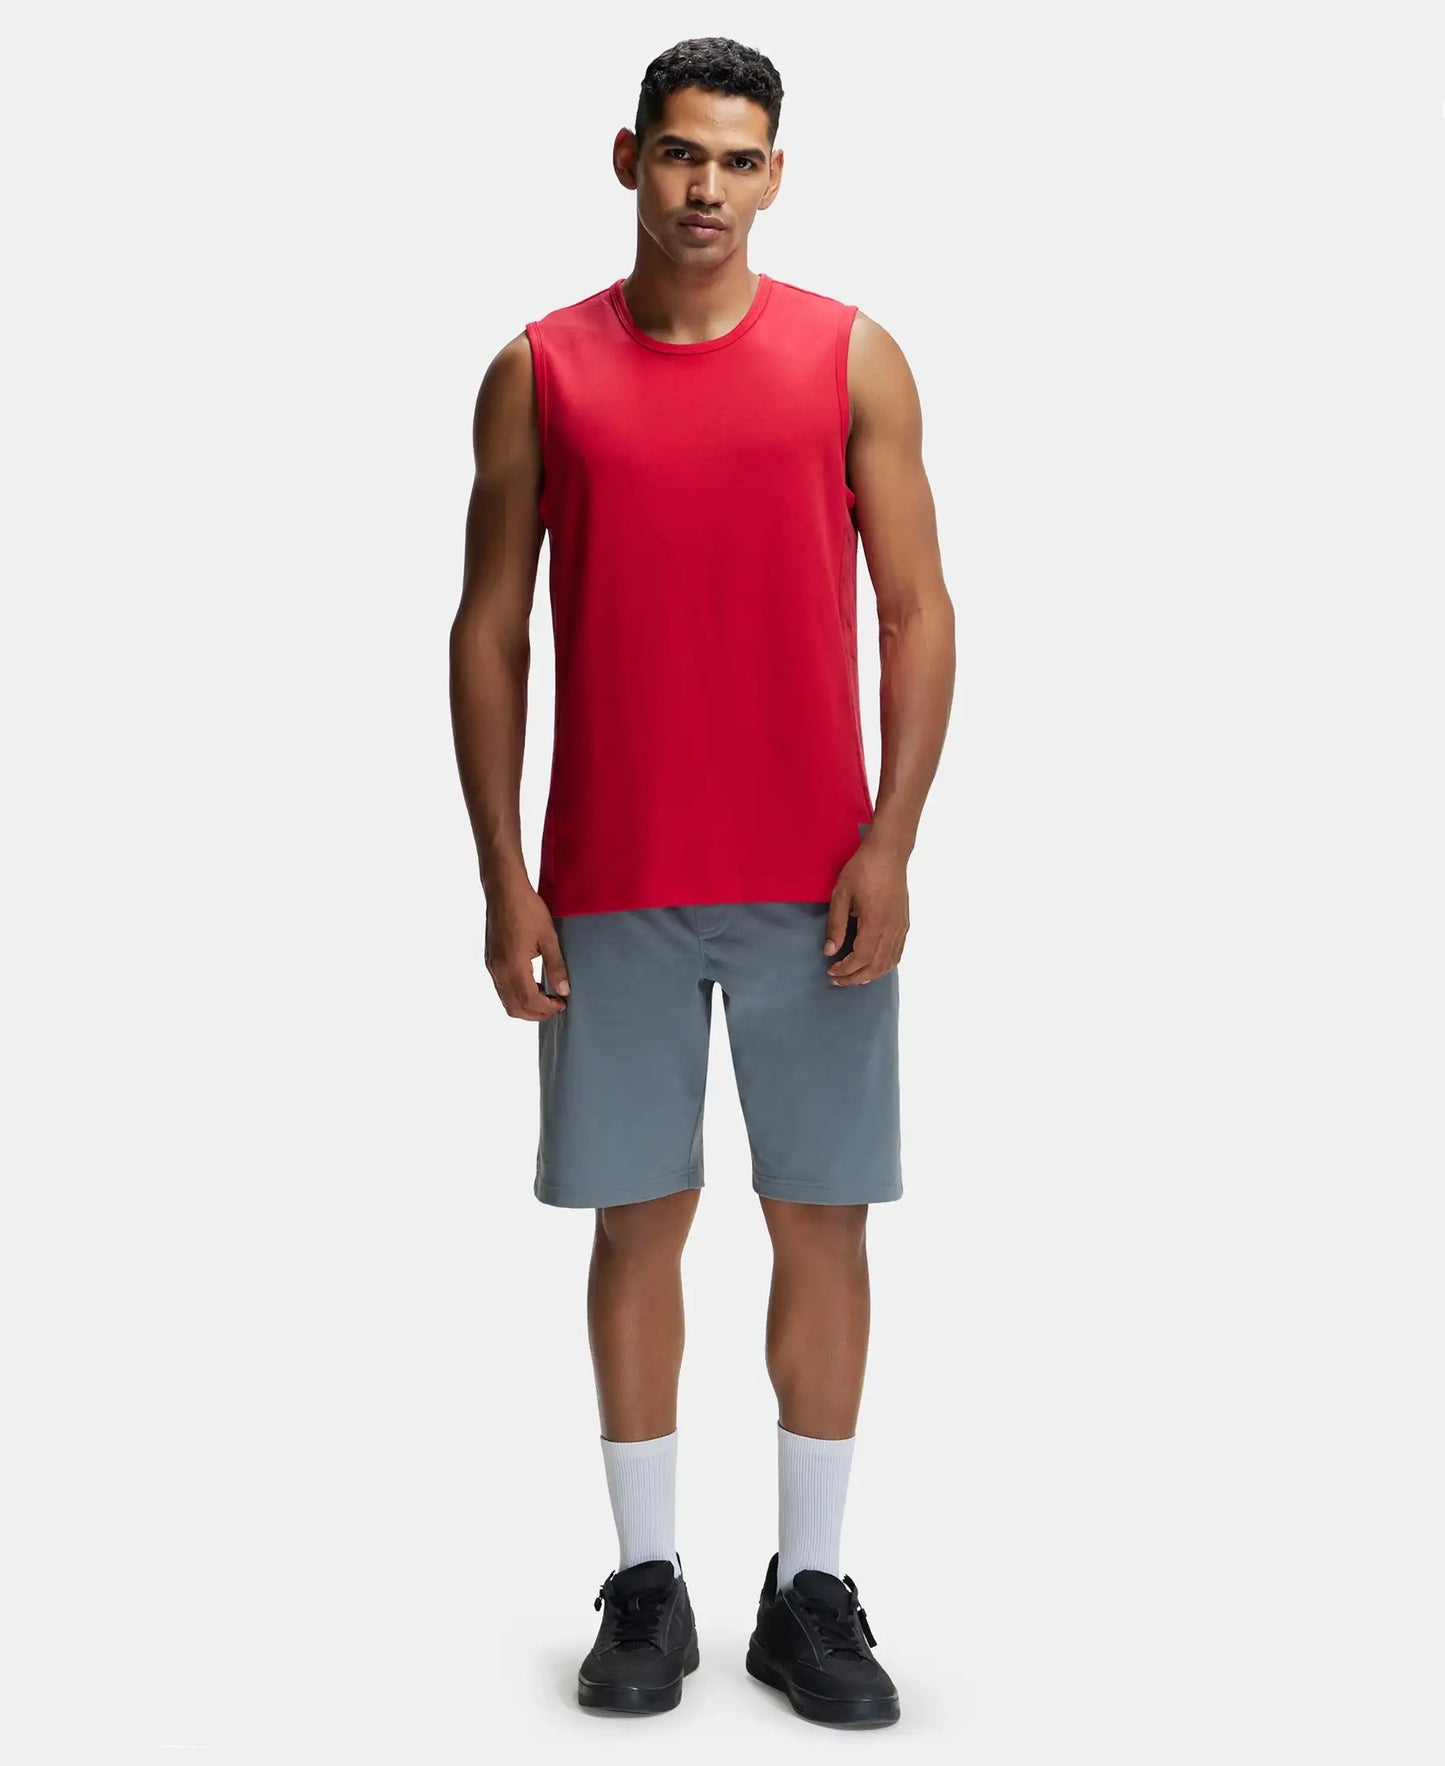 Super Combed Cotton Blend Round Neck Muscle Tee with Breathable Mesh - Team Red-4